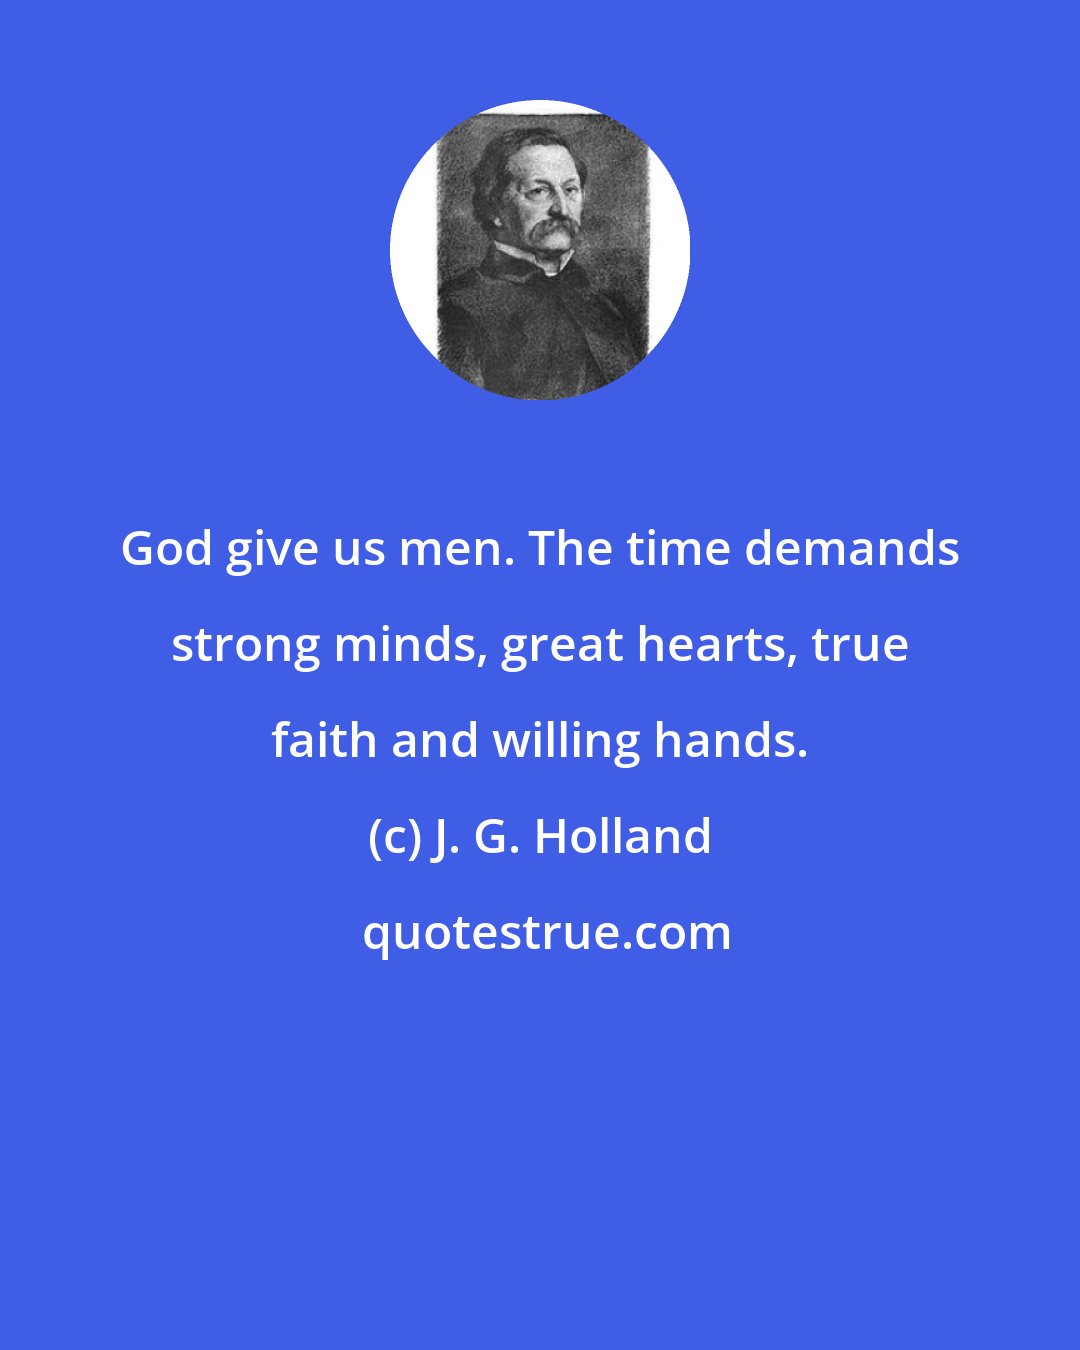 J. G. Holland: God give us men. The time demands strong minds, great hearts, true faith and willing hands.